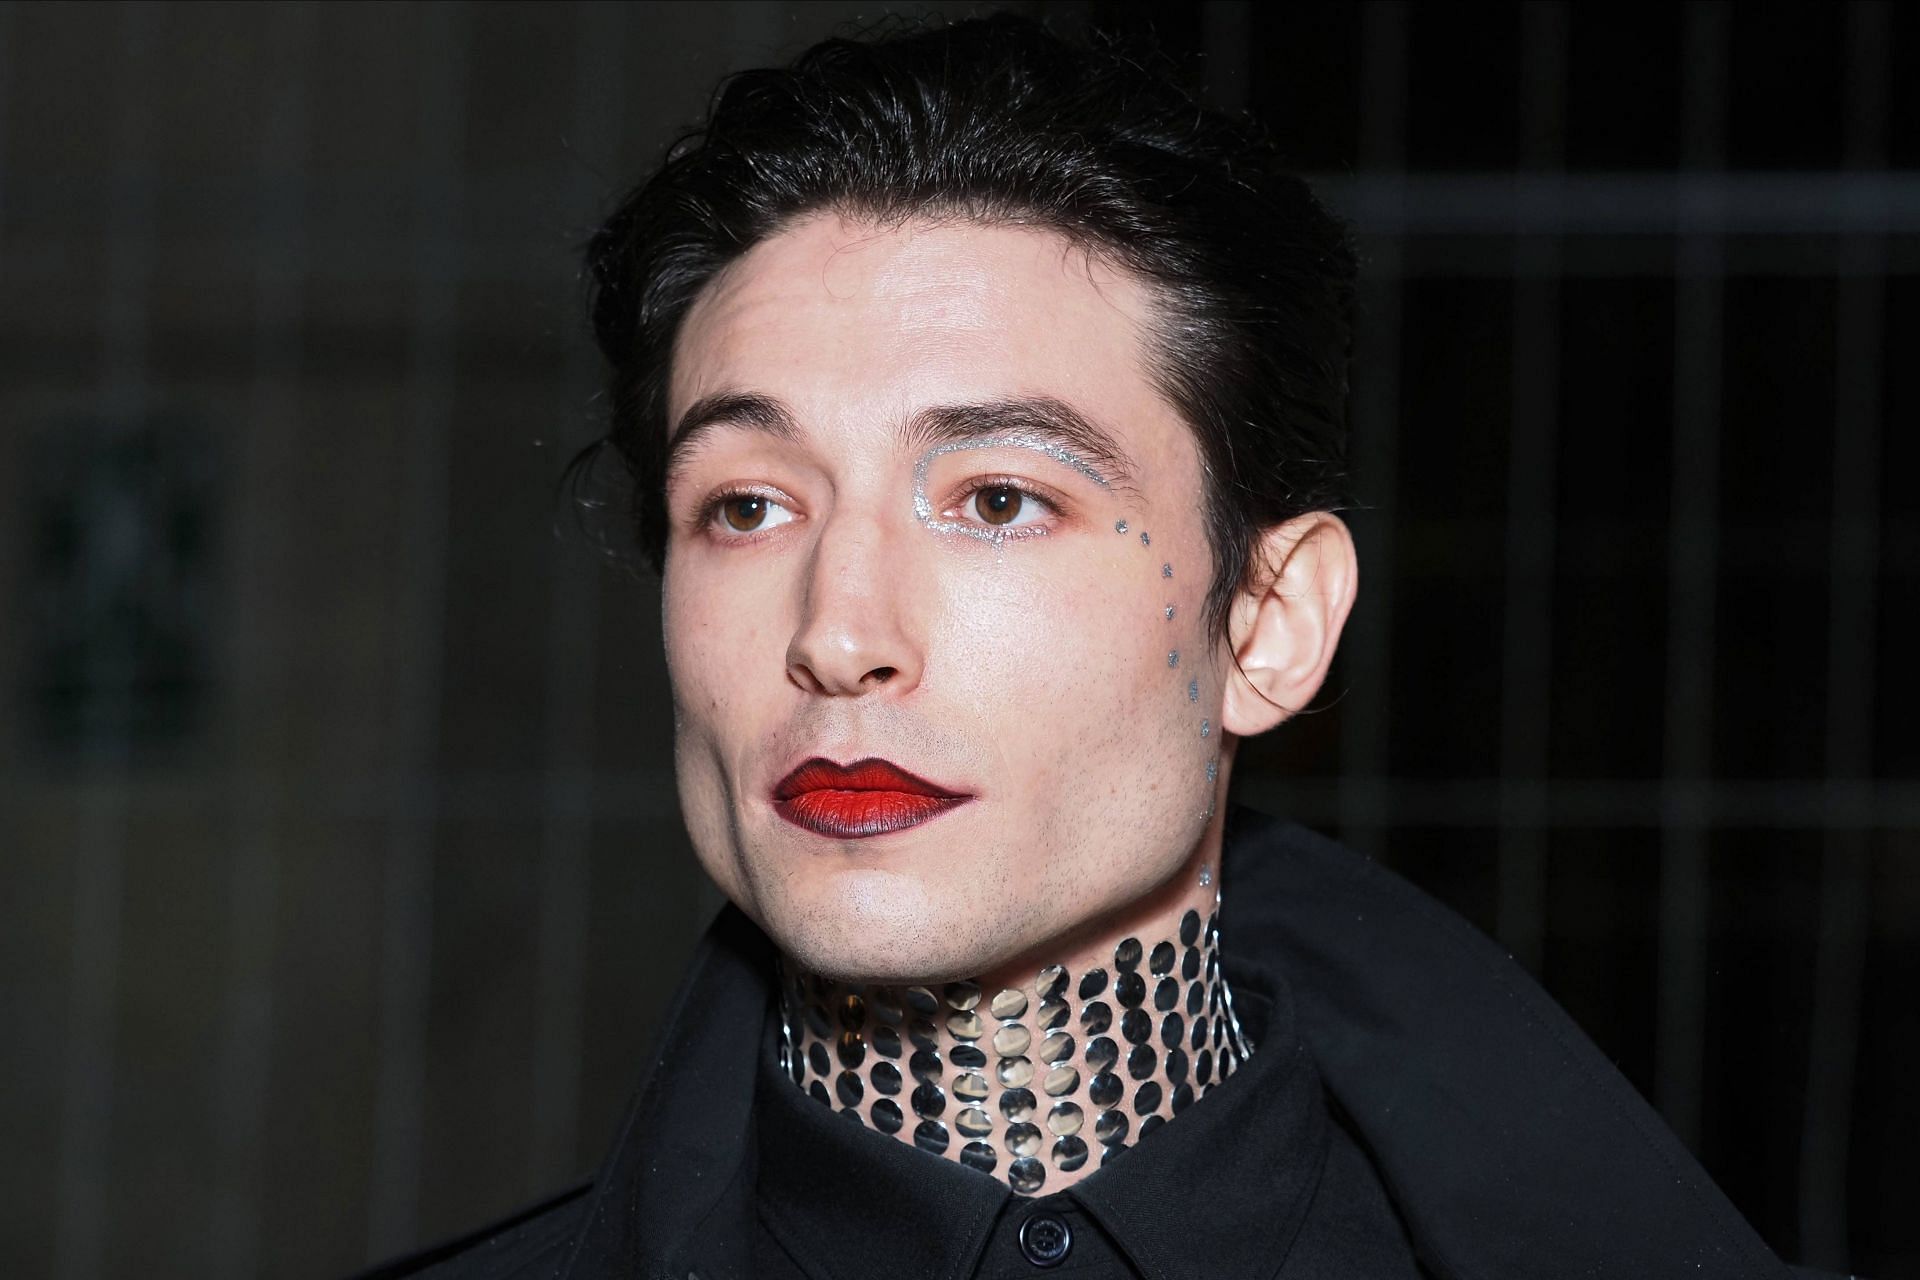 How much jail time would Ezra Miller be facing? More details revealed about the plea filed by the attorney of the actor. (Image via Shutterstock)